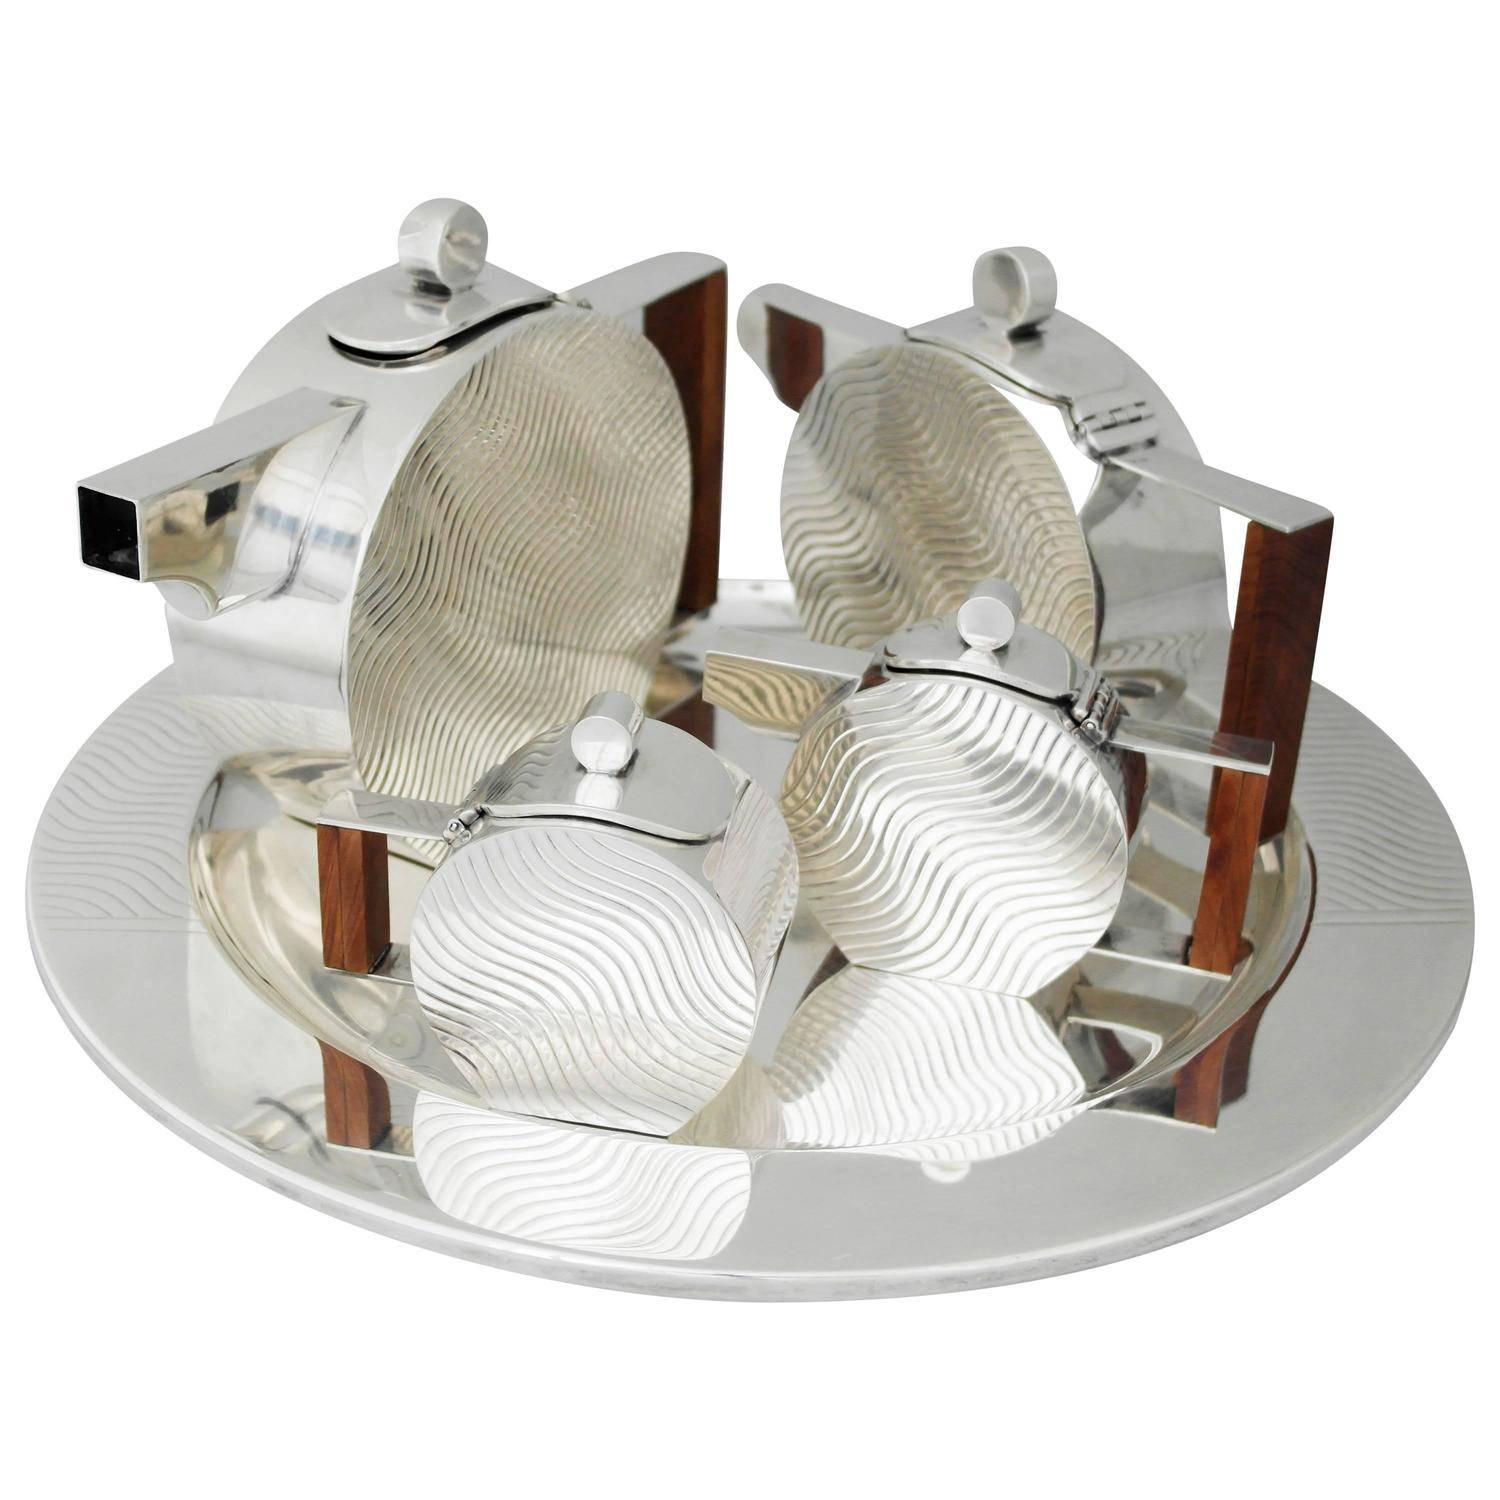 Incredible Art Deco Inspired Sterling Silver Coffee and Tea Service With Tray